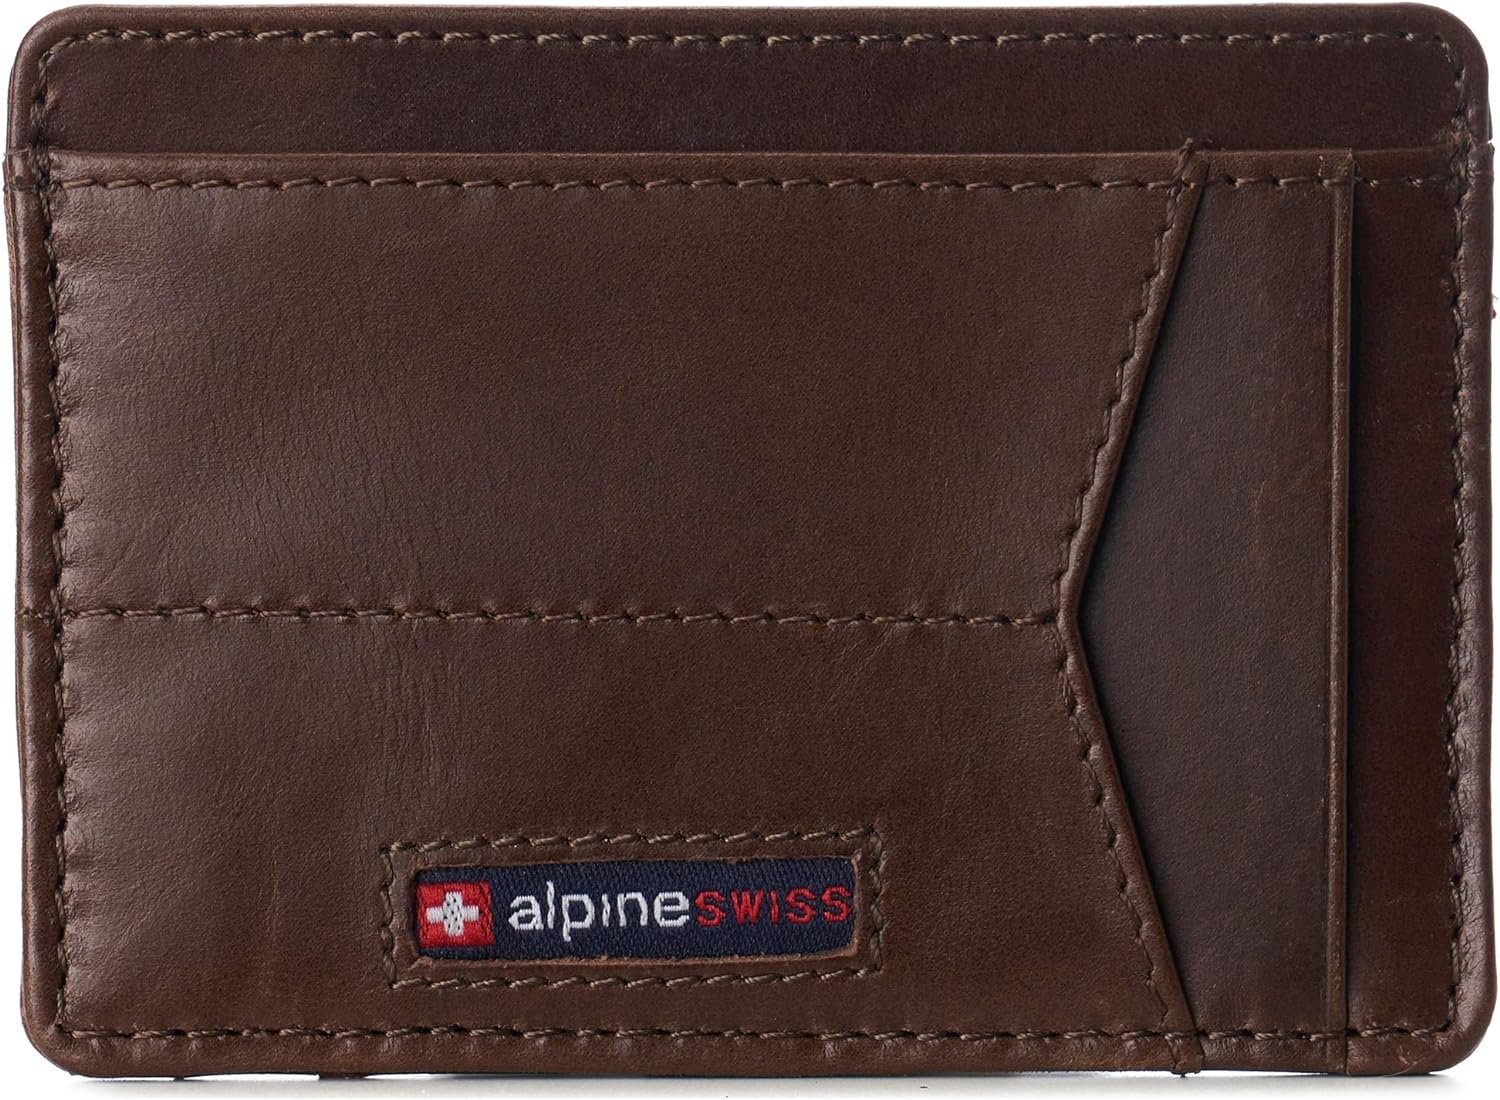 Alpine Swiss Oliver Wallet Review